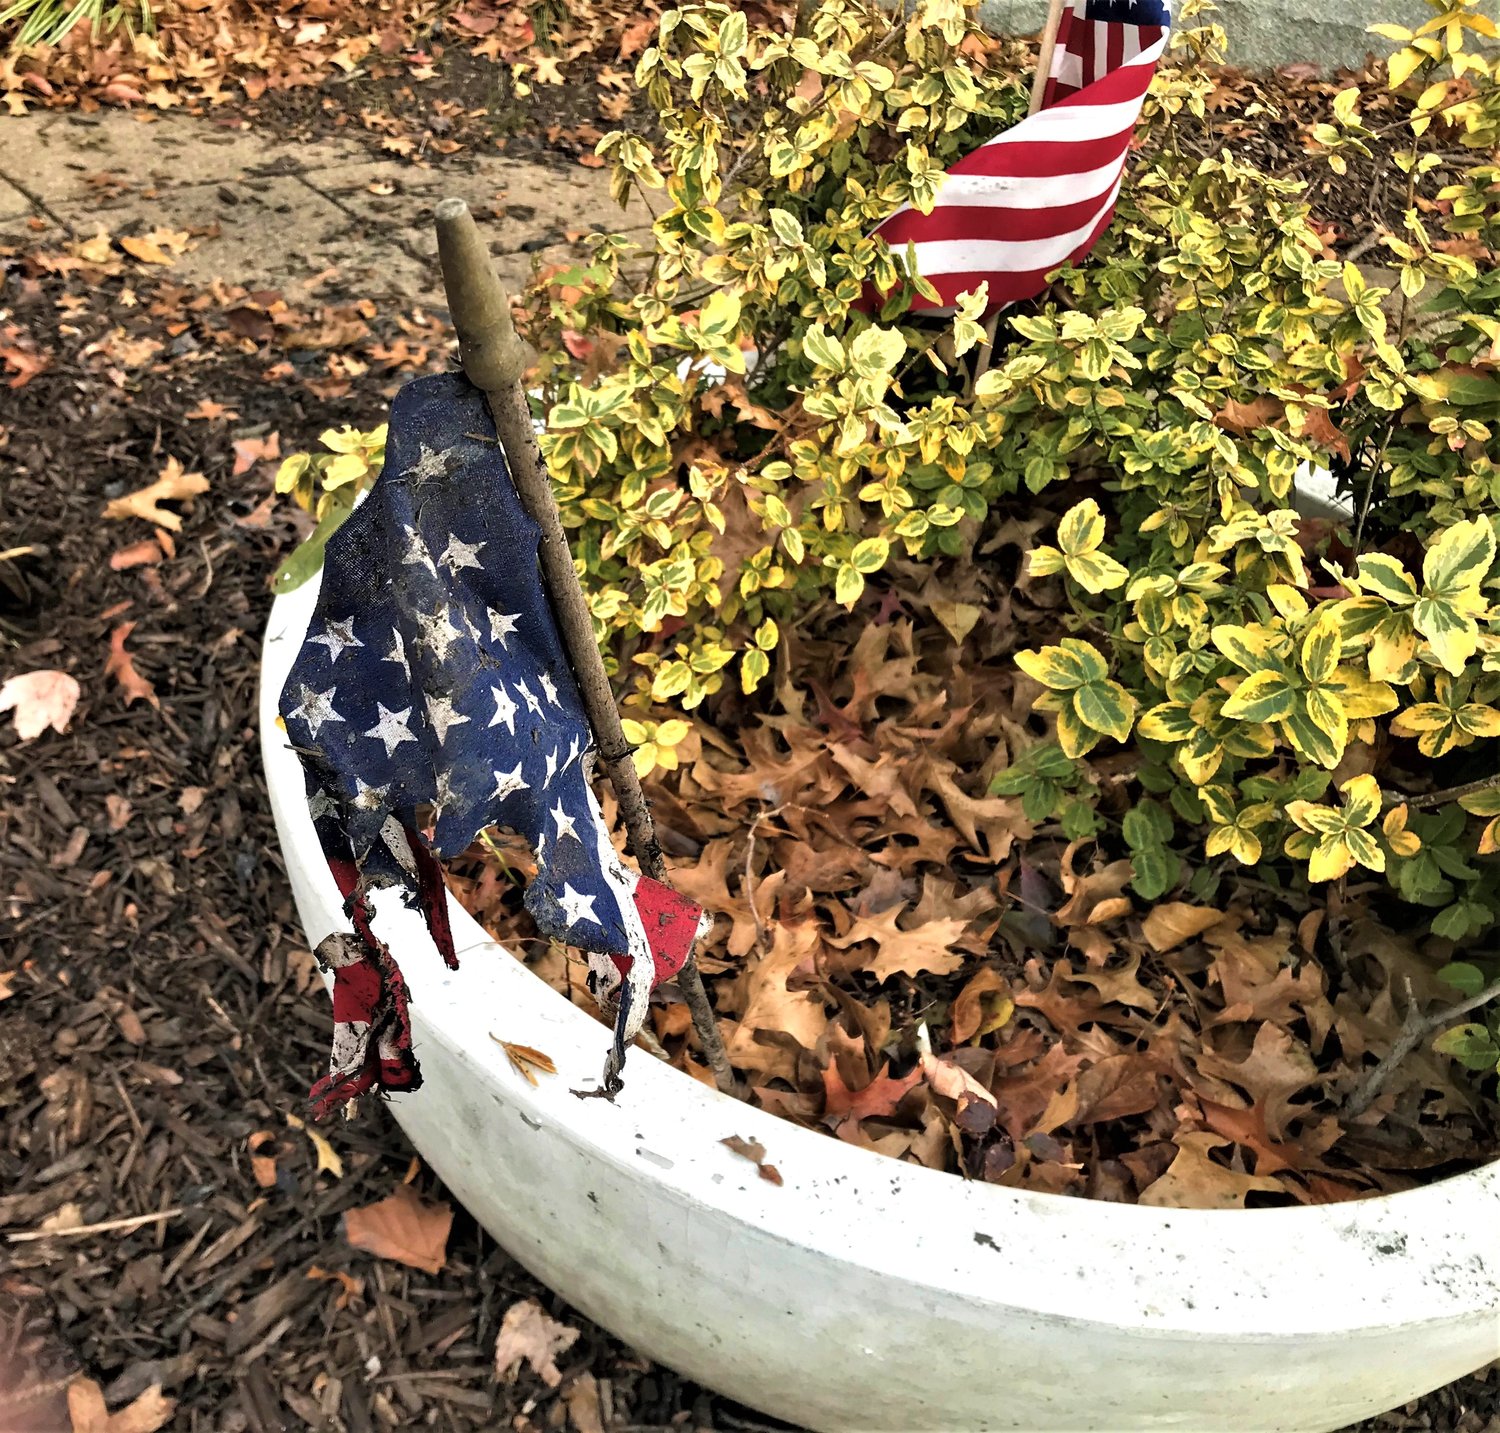 Sanitary District No. 2  Commissioner Jerry Brown said there was light scorch damage to part of the war memorial at Silver Lake County Park, and a small American flag was burned in front of the main war monument honoring World War II veterans.